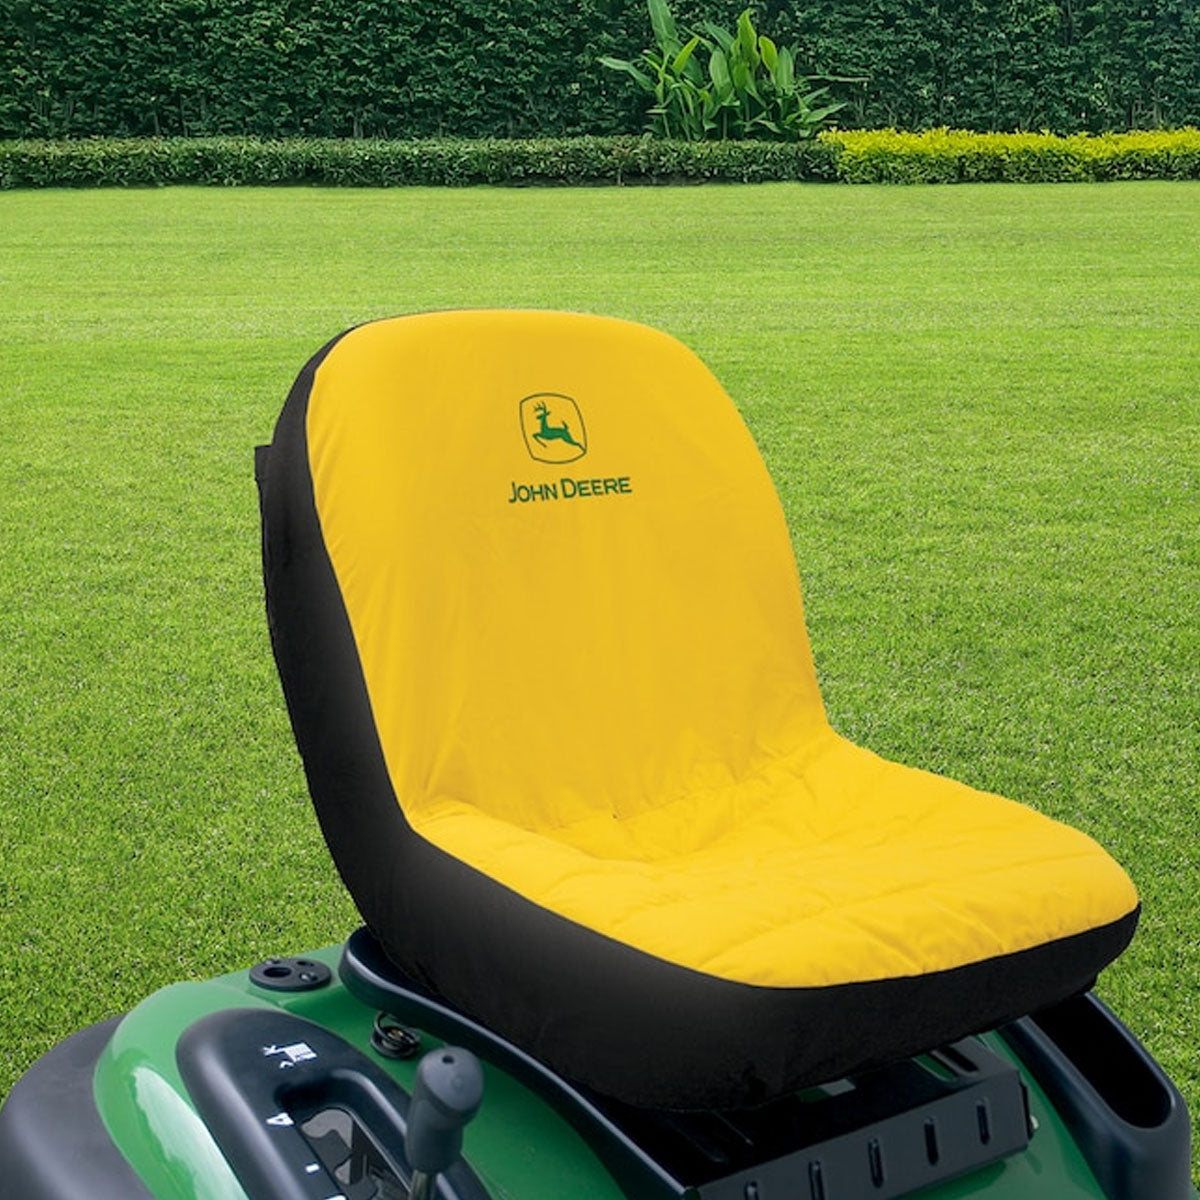 John Deere 11" Small Mower Seat Cover for Ride-on Mowers